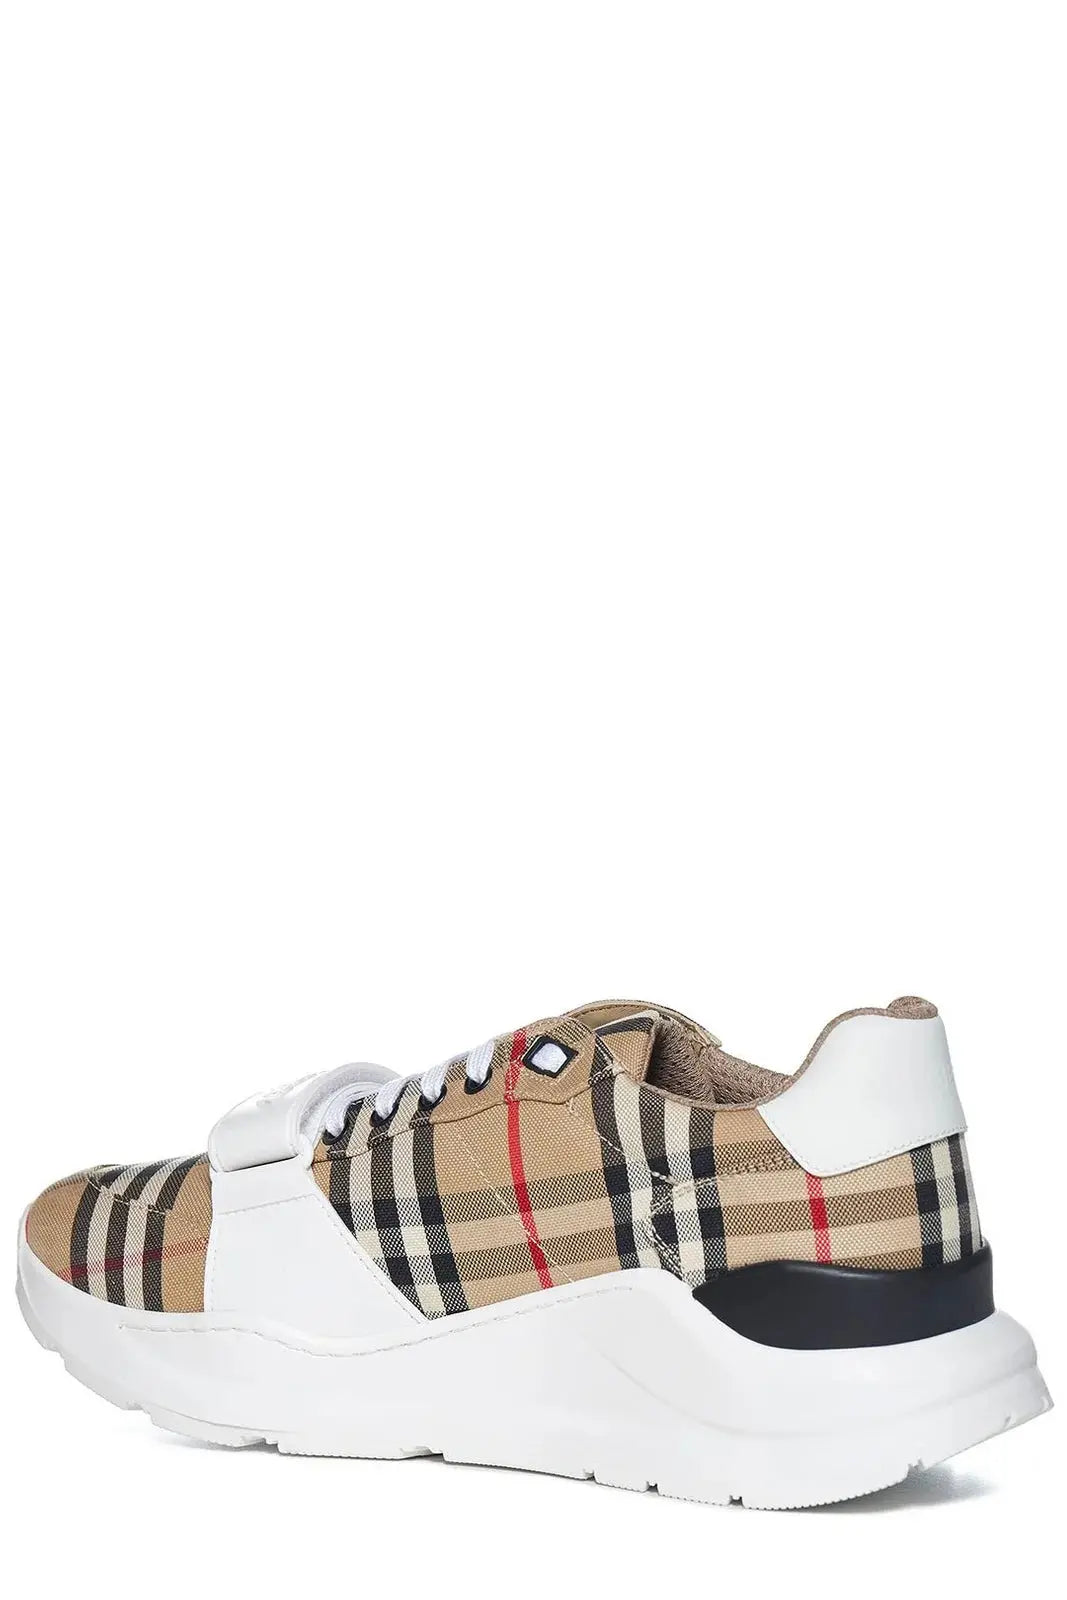 Burberry Vintage Checked Lace-Up Sneakers - flizzone